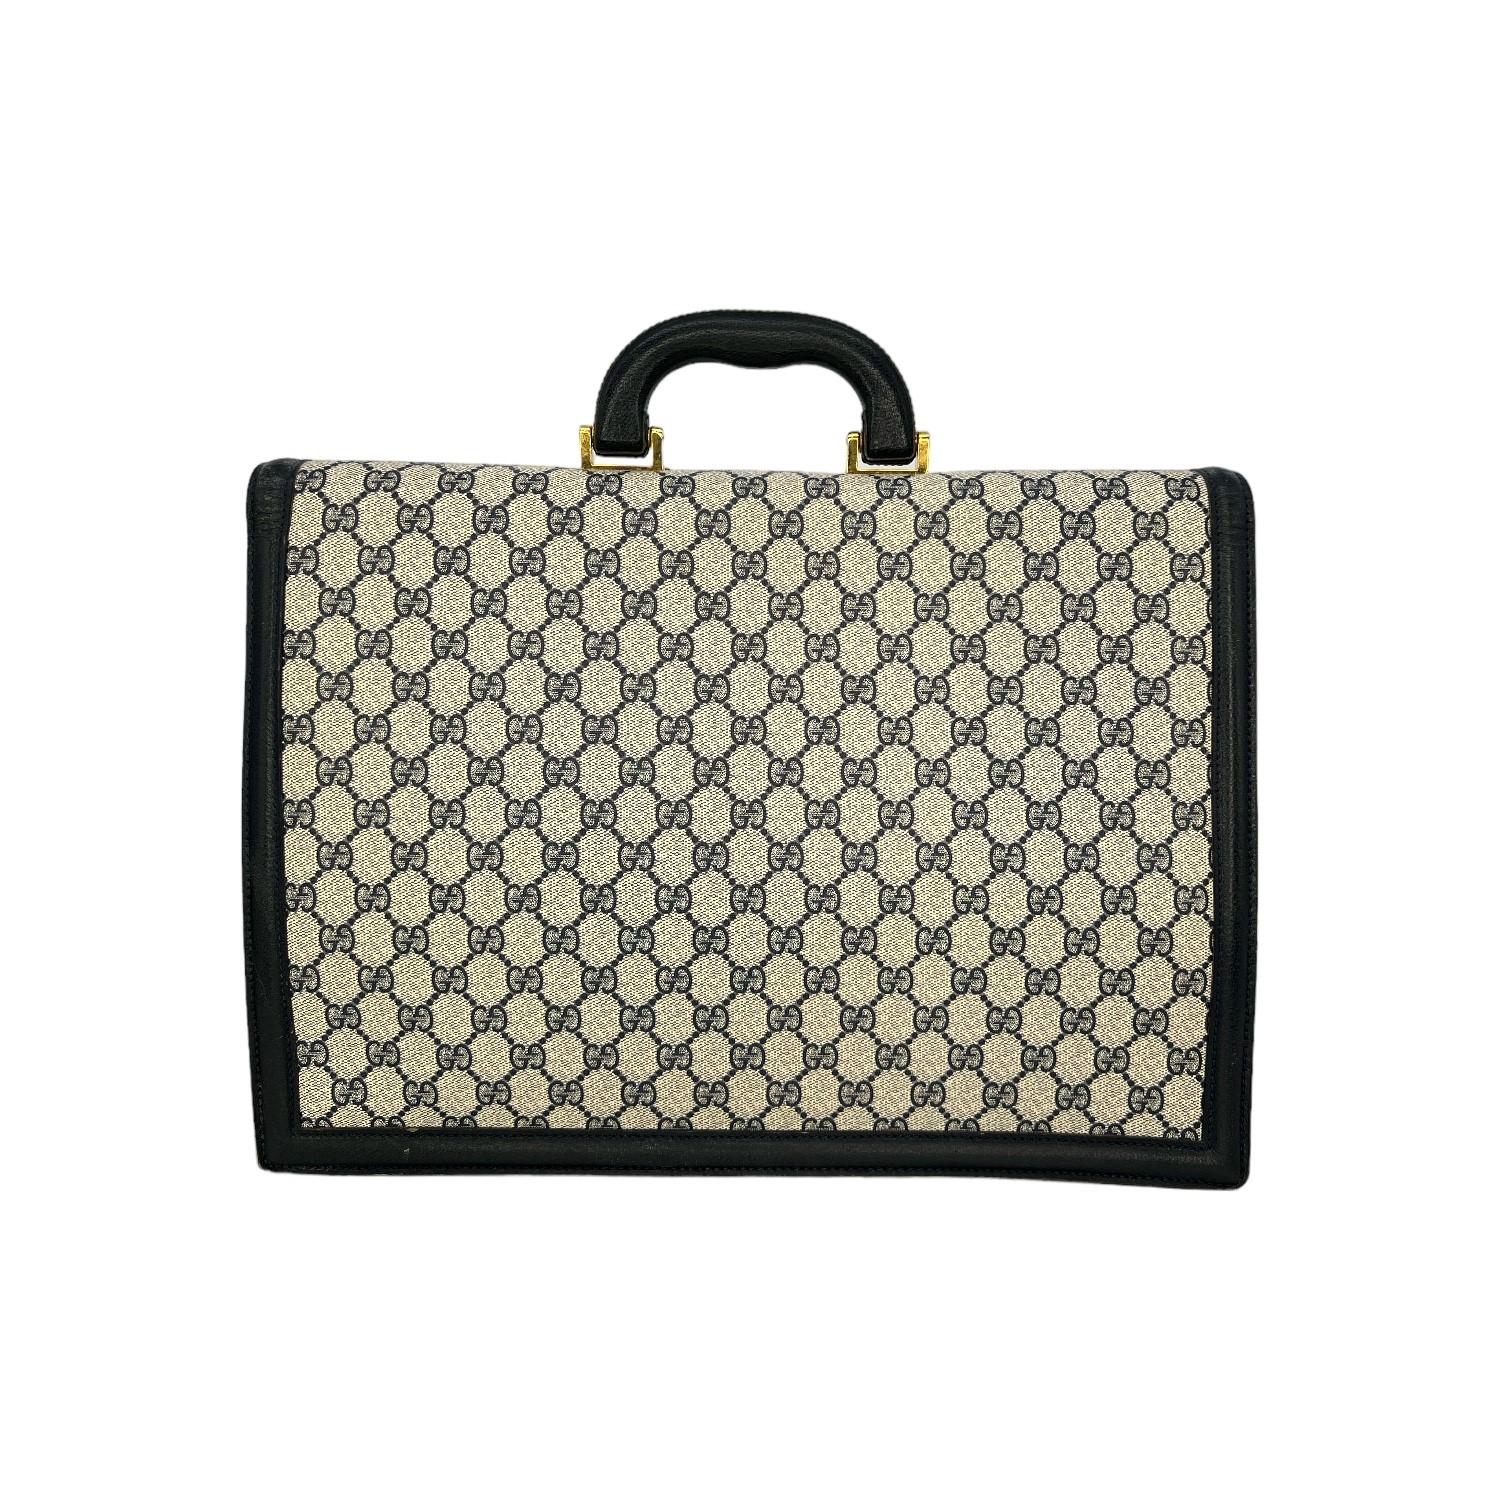 This Gucci GG Plus Navy Blue Briefcase Portfolio was made in Italy and it is finely crafted of the classic GG Supreme canvas exterior with leather trimming and gold-tone hardware features. It has a leather top handle. It has a push-lock closure that